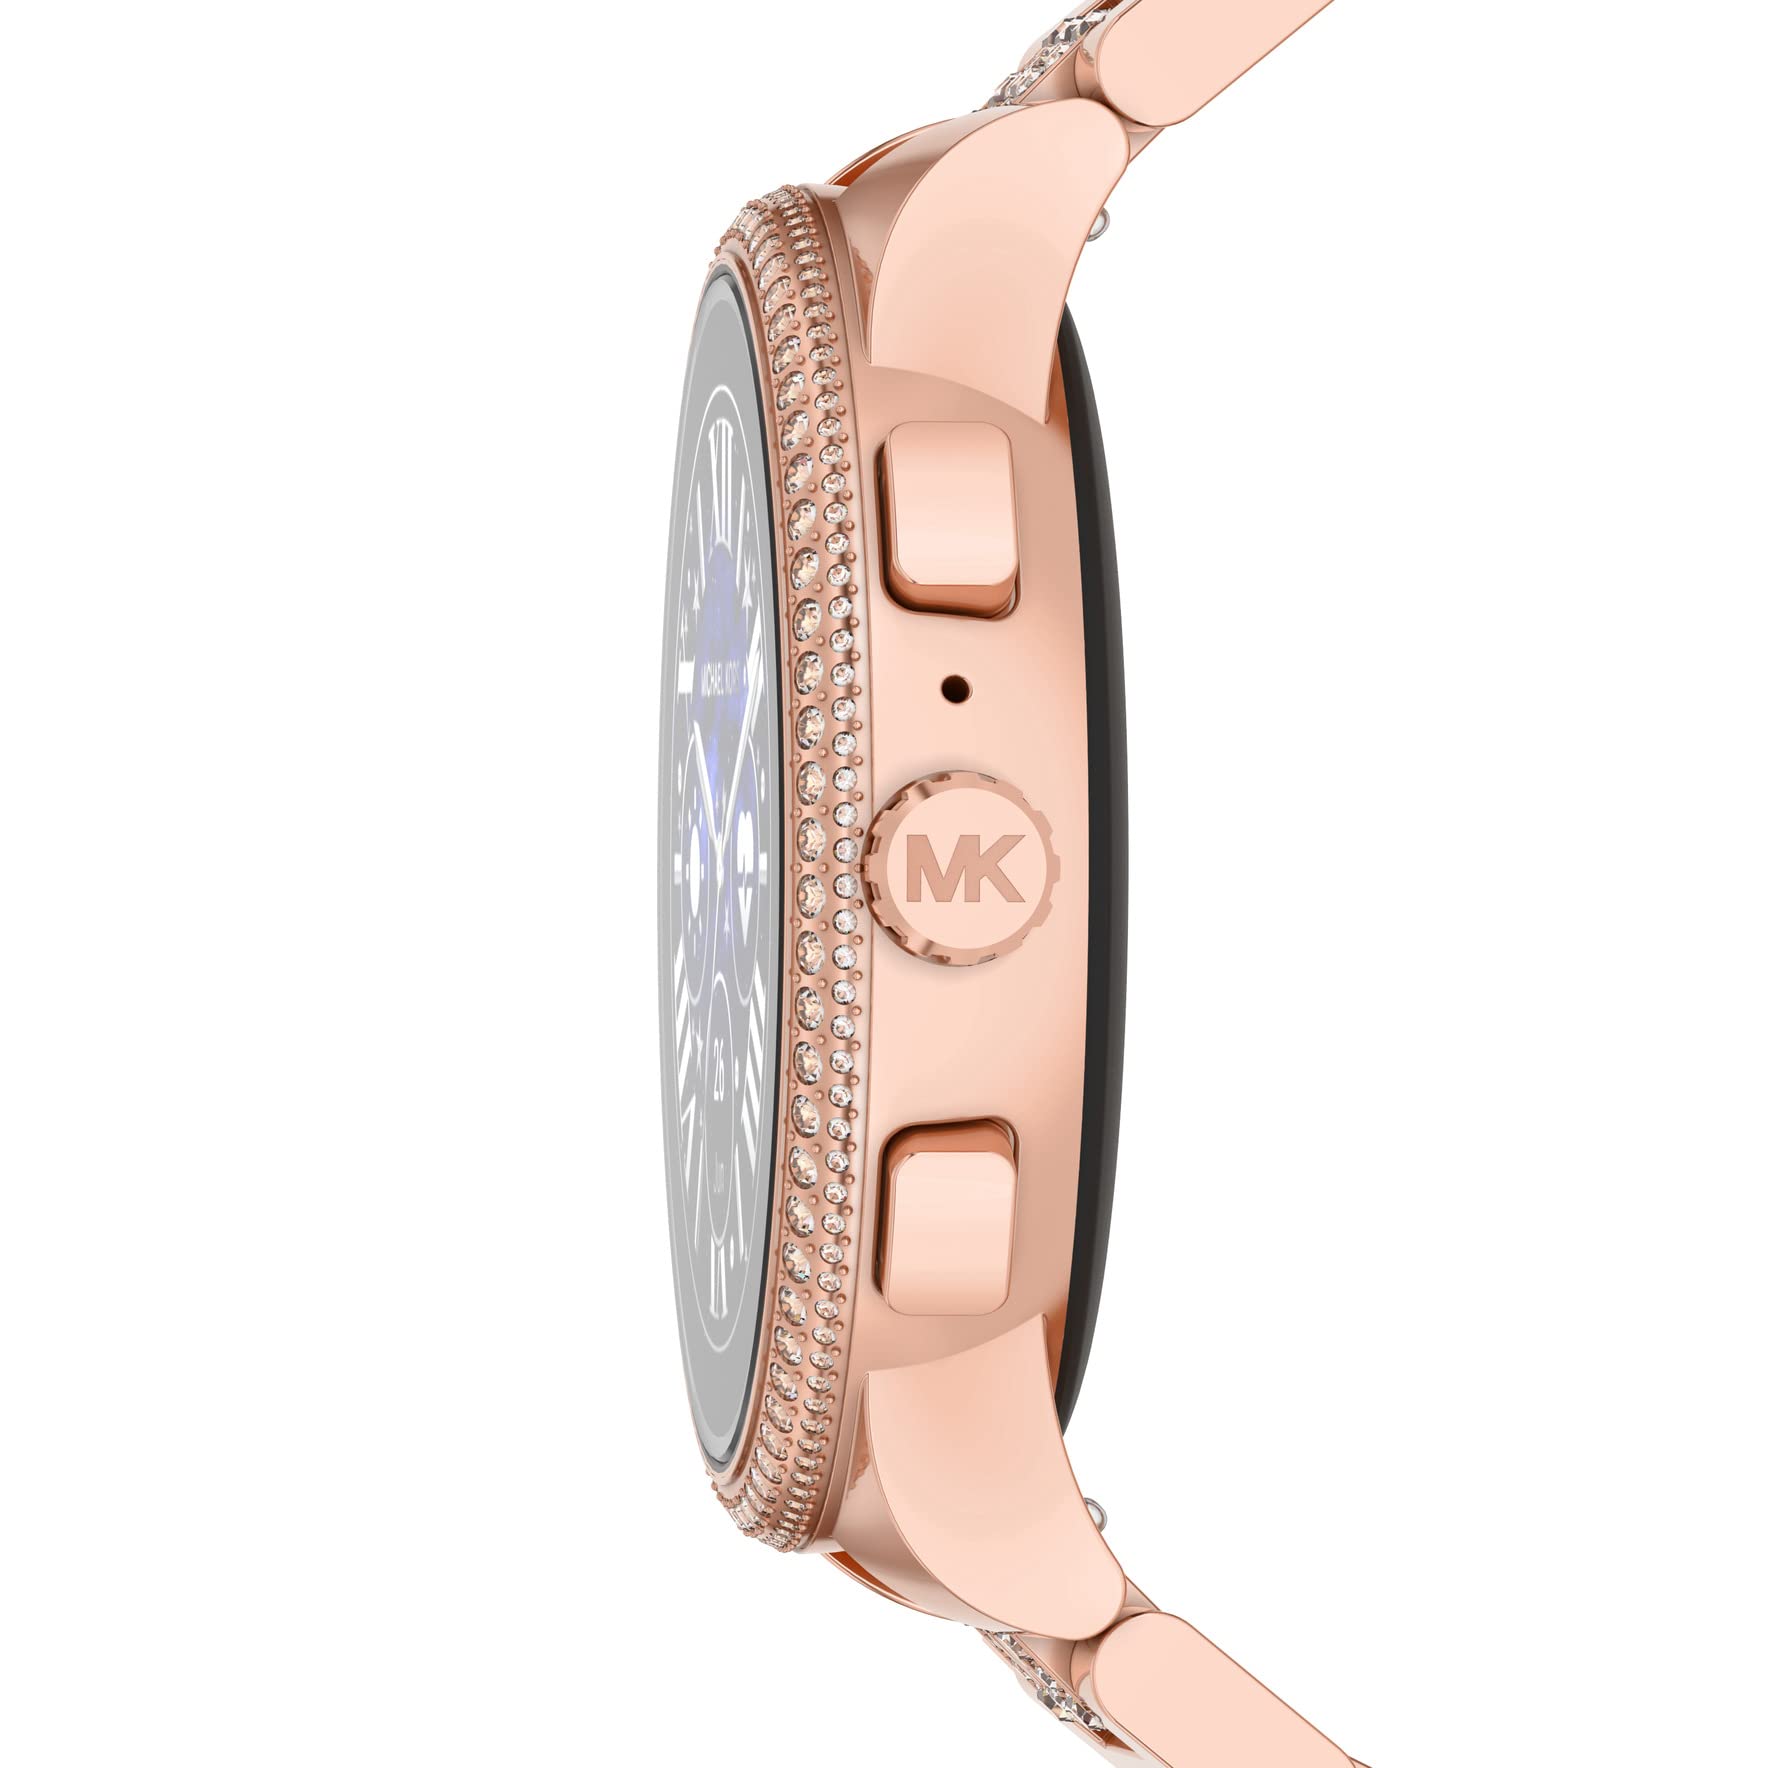 Michael Kors Access Activity Tracker Crosby Grey Silicone Rose Gold  Bracelet  Amazon price tracker  tracking Amazon price history charts  Amazon price watches Amazon price drop alerts  camelcamelcamelcom